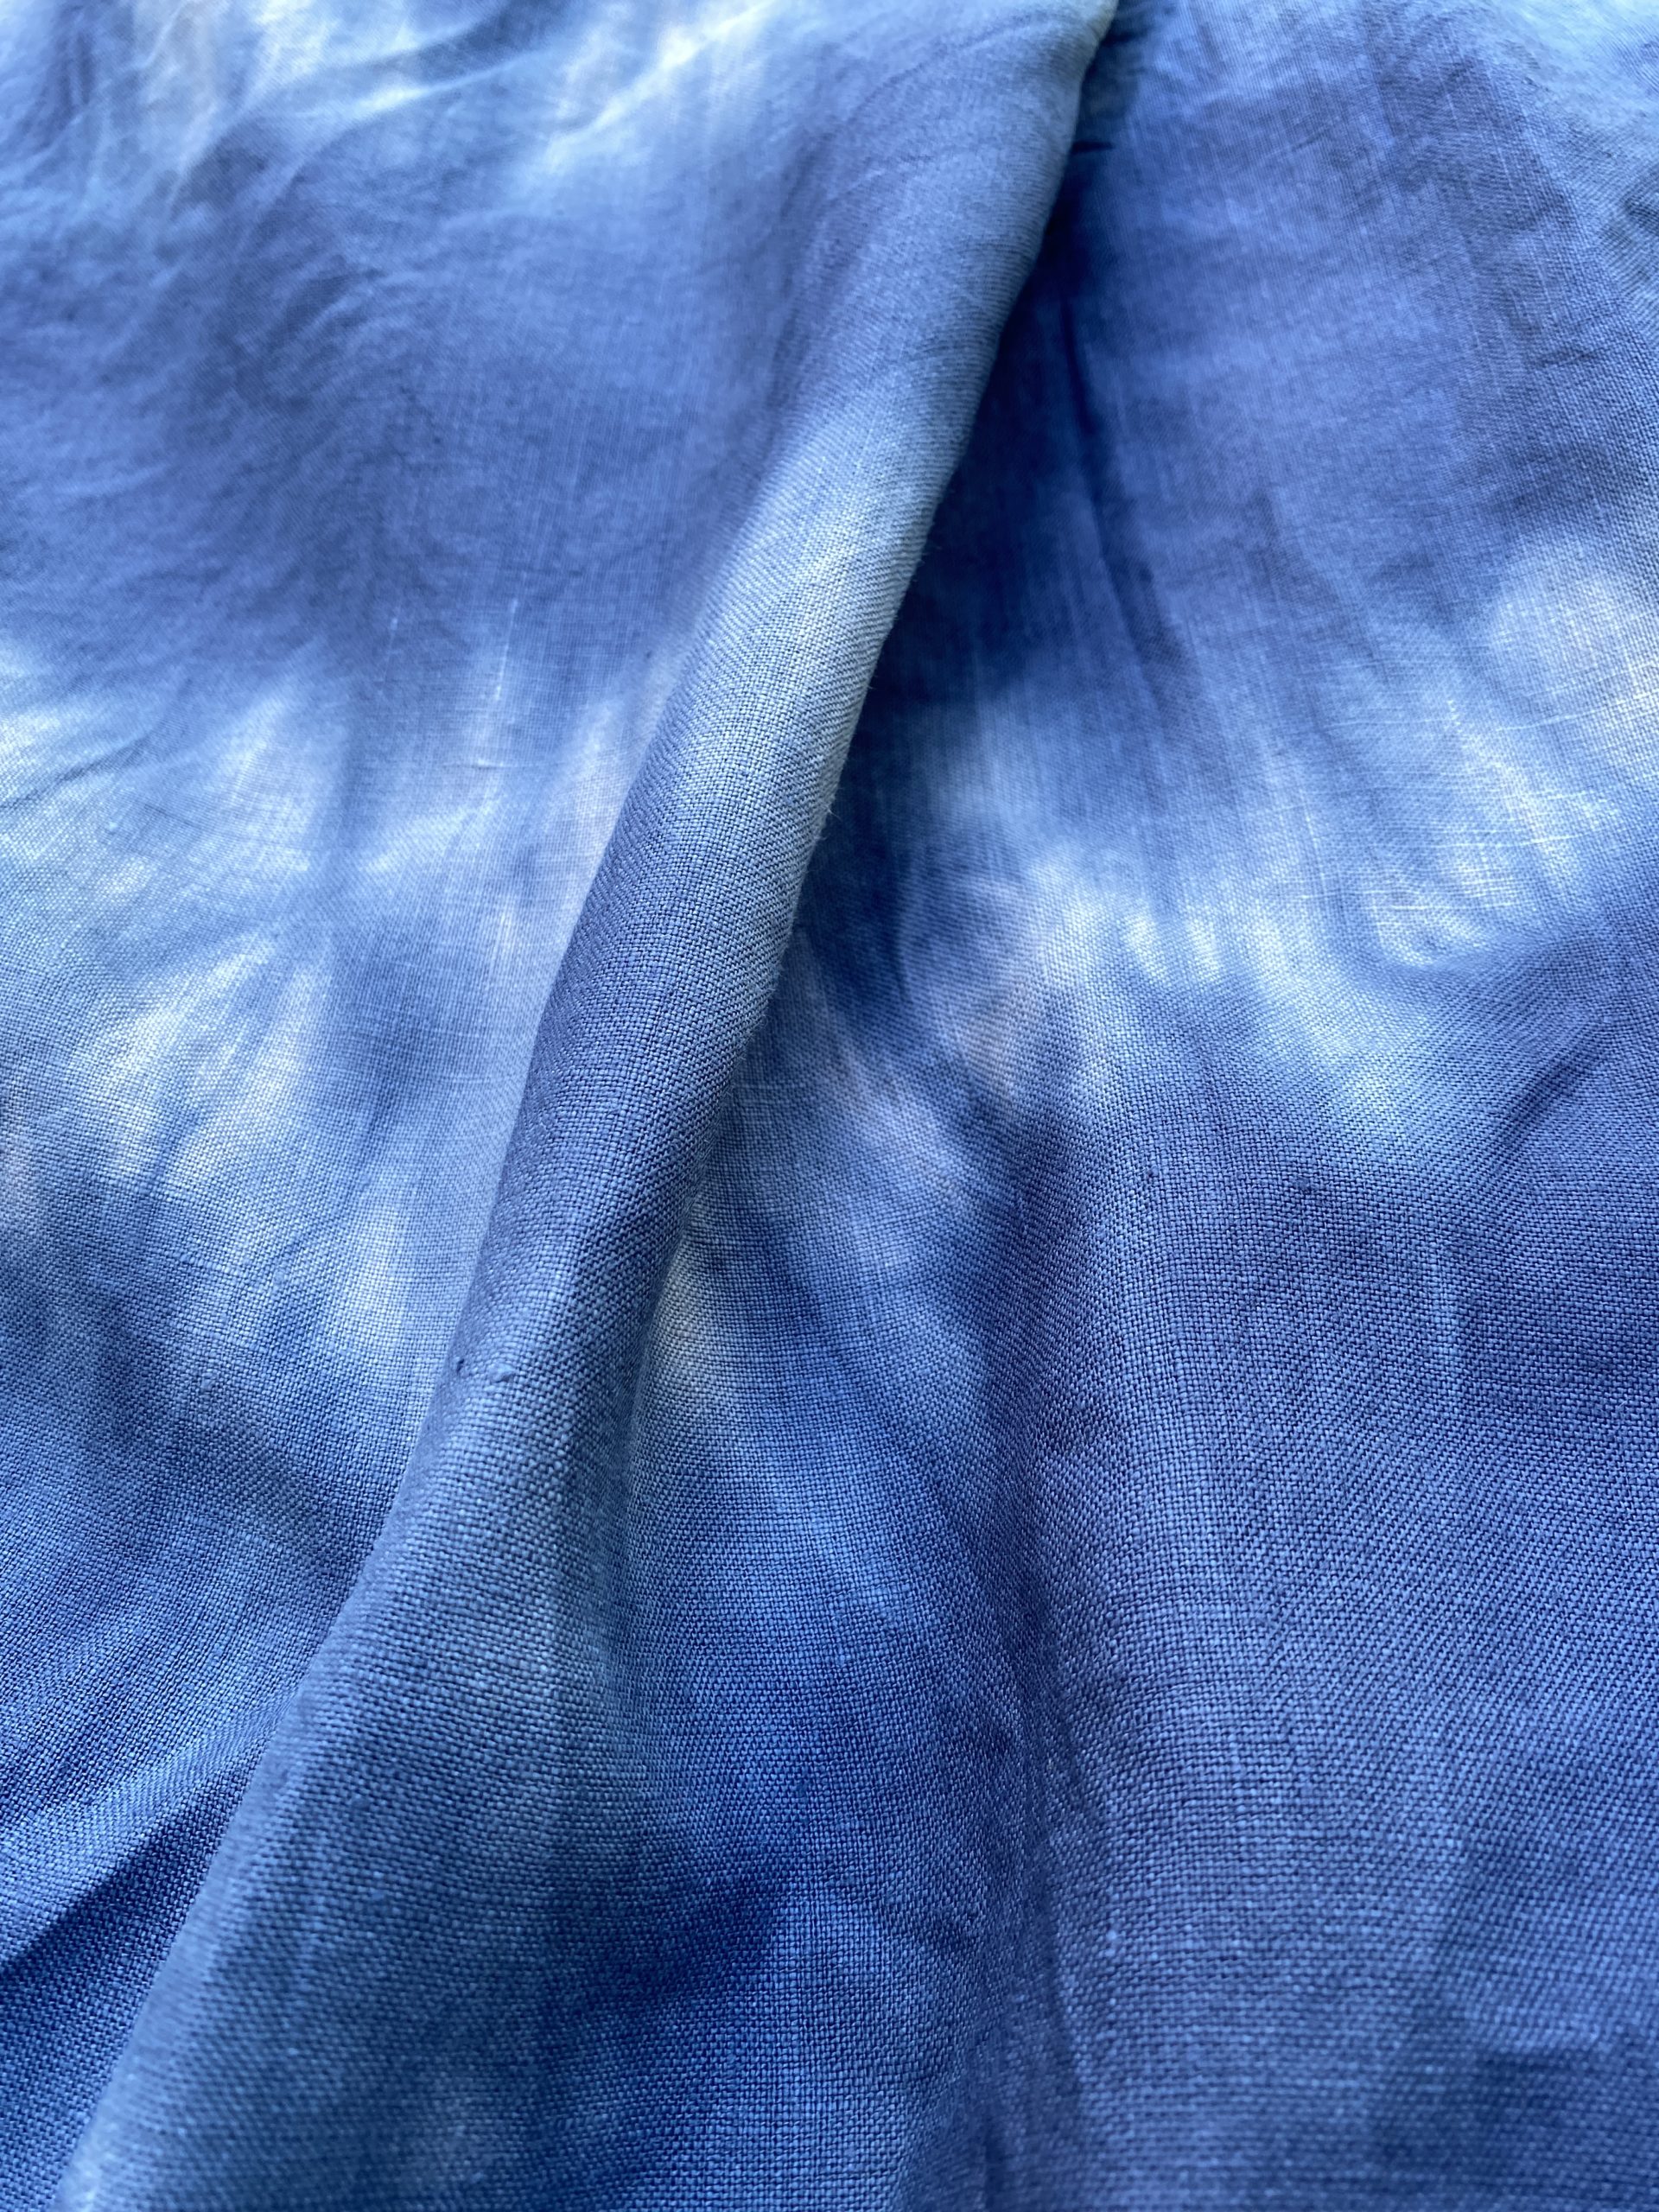 Tie dye washed linen – Simply Fabrics